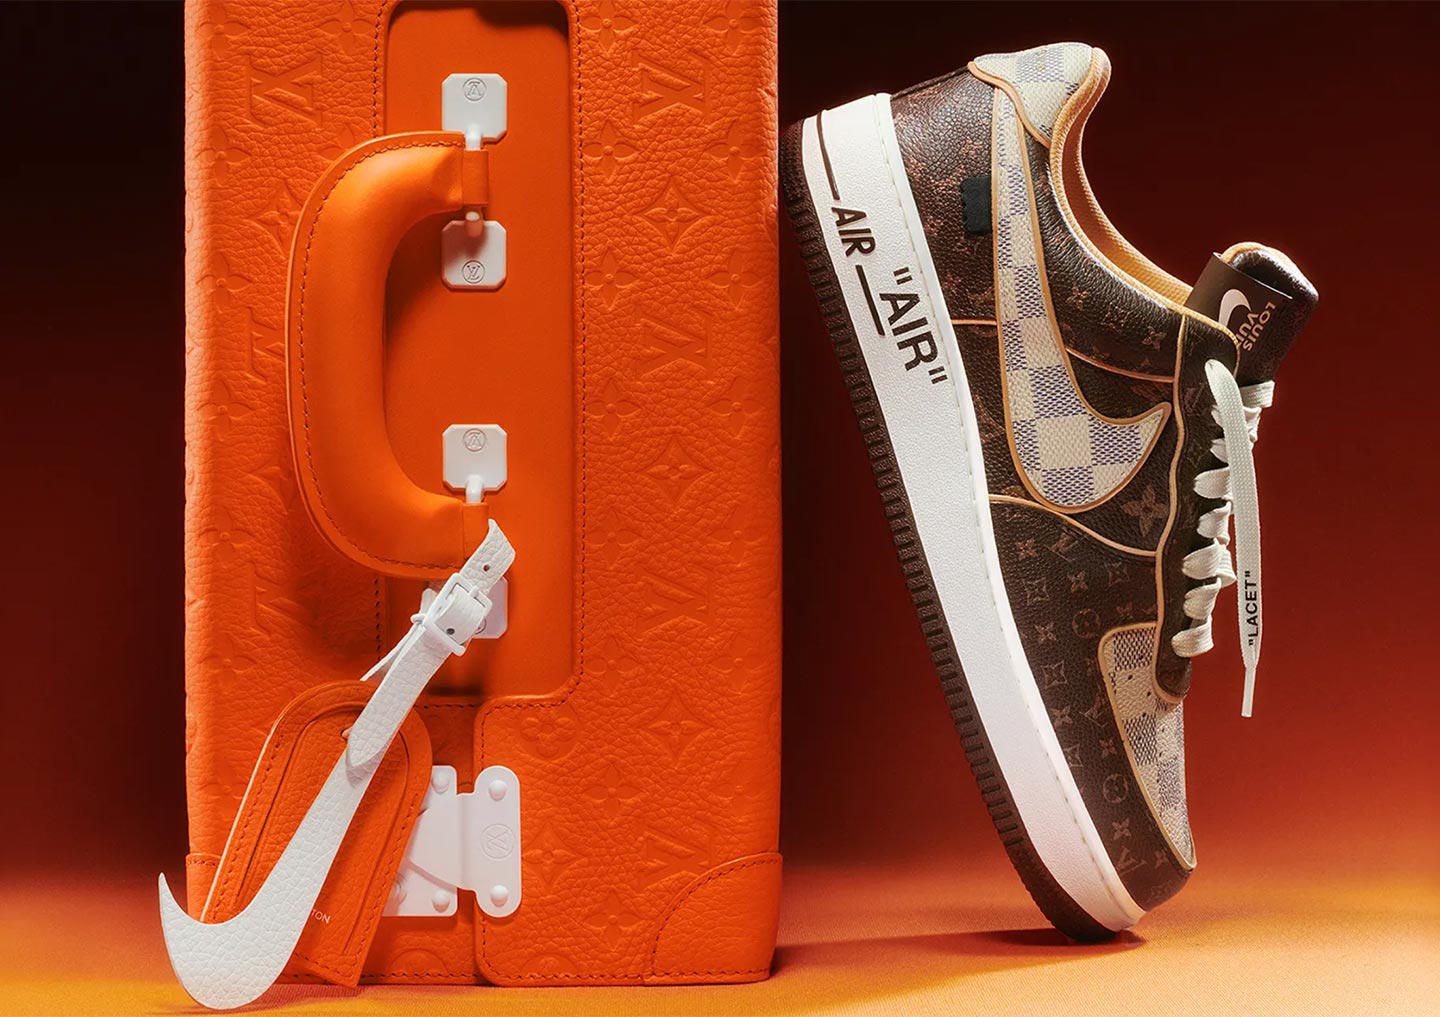 Presenting his spring-summer 2022 collection for Louis Vuitton, the late menswear creative director Virgil Abloh unveiled the first ever Louis Vuitton Nike Air Force 1